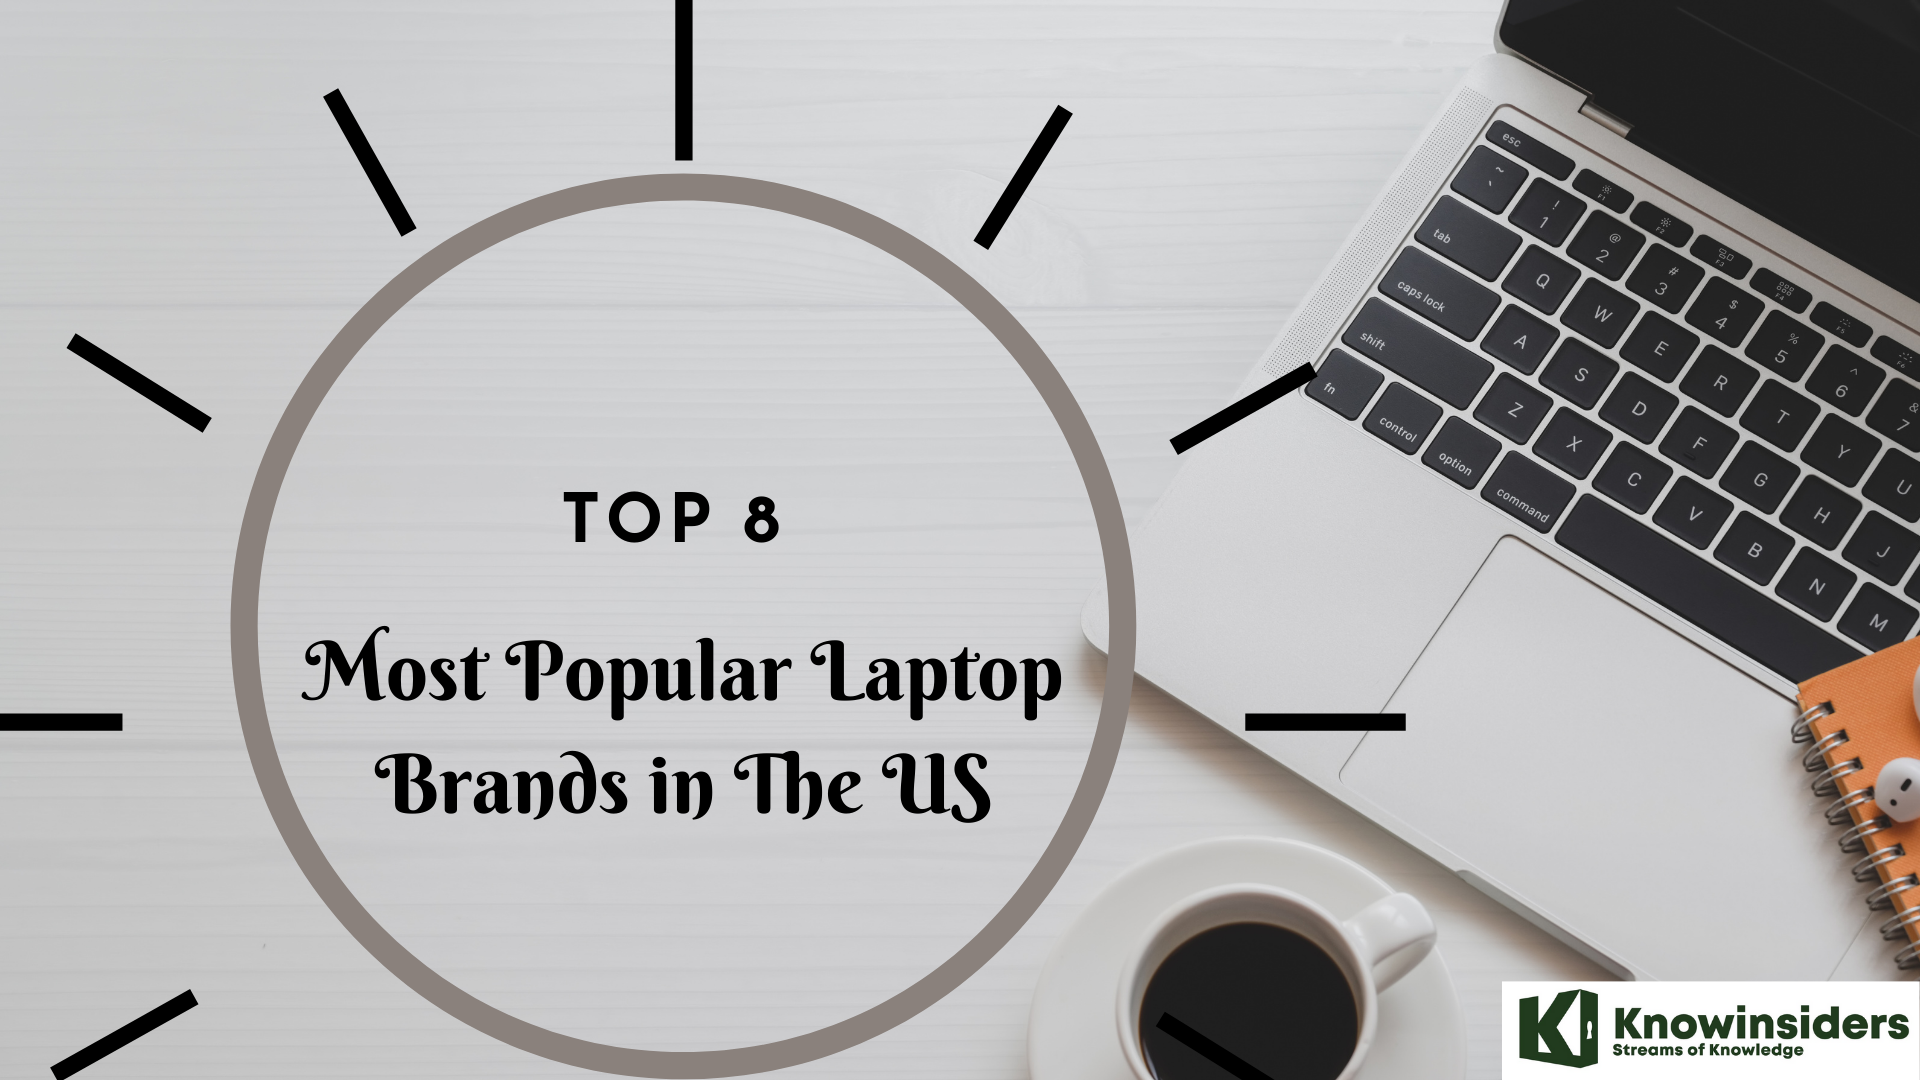 What Are The Most Popular Laptop Brands in The U.S?